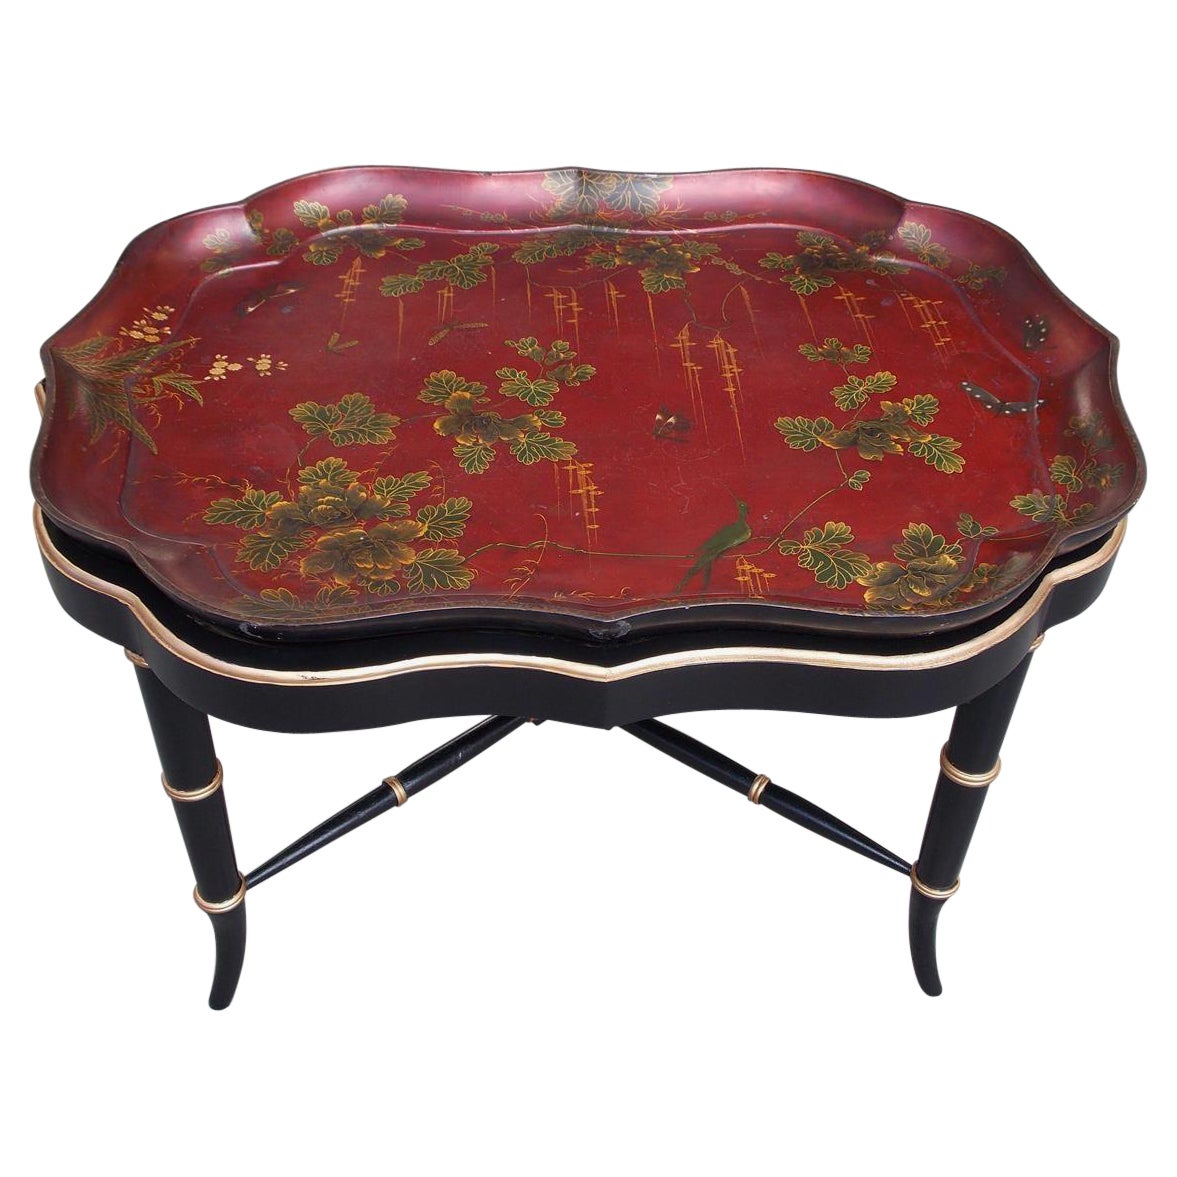 English Paper Mache Red Lacquered Scalloped Tray with Faux Bamboo Stand, C. 1810